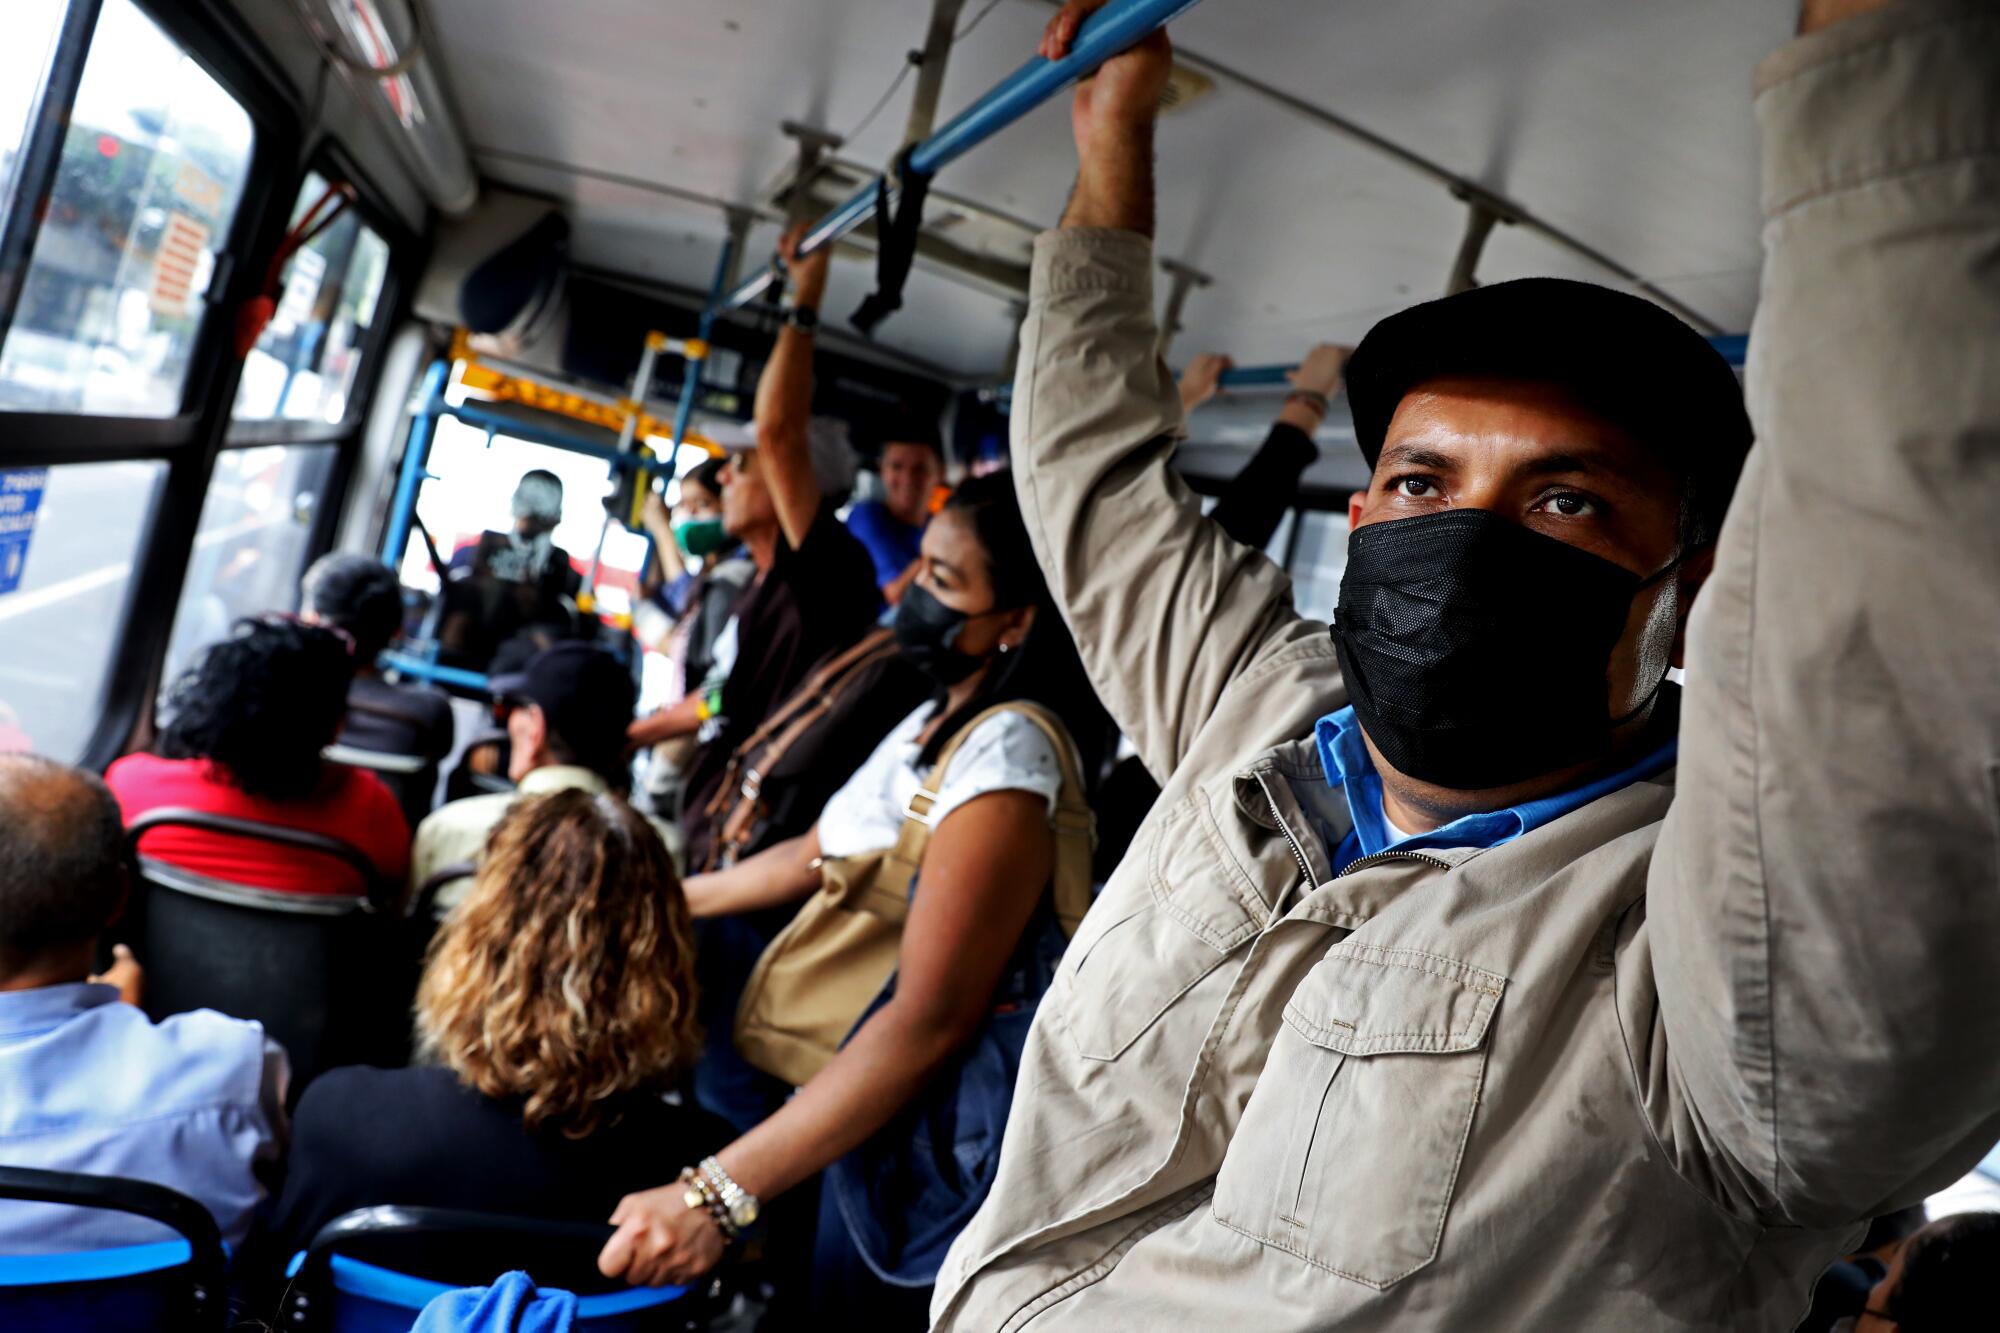 Man stands in a crowded bus.